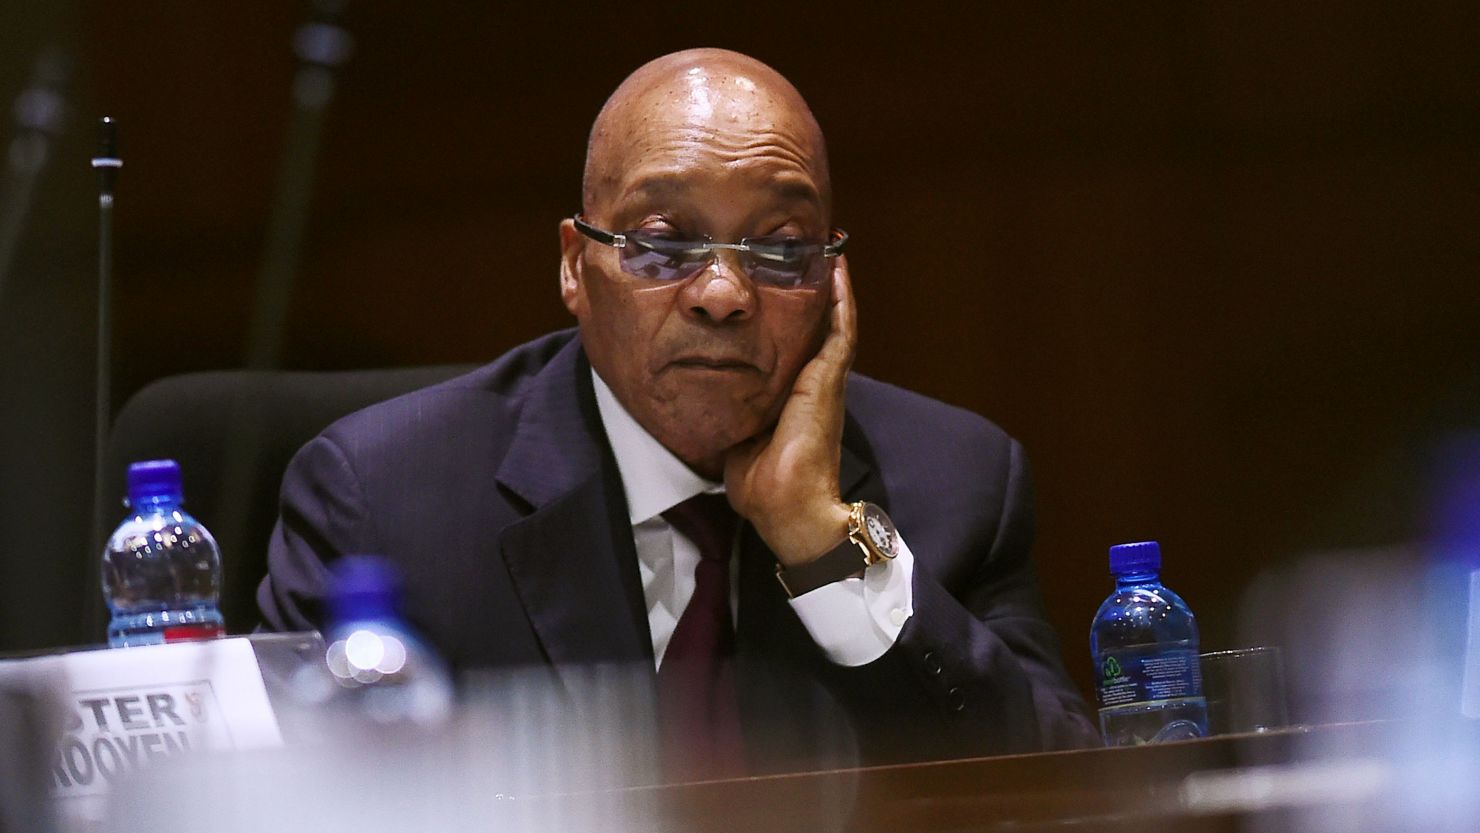 Zuma's presidential term runs out in 2019, but the 54th ANC conference could hasten his departure.